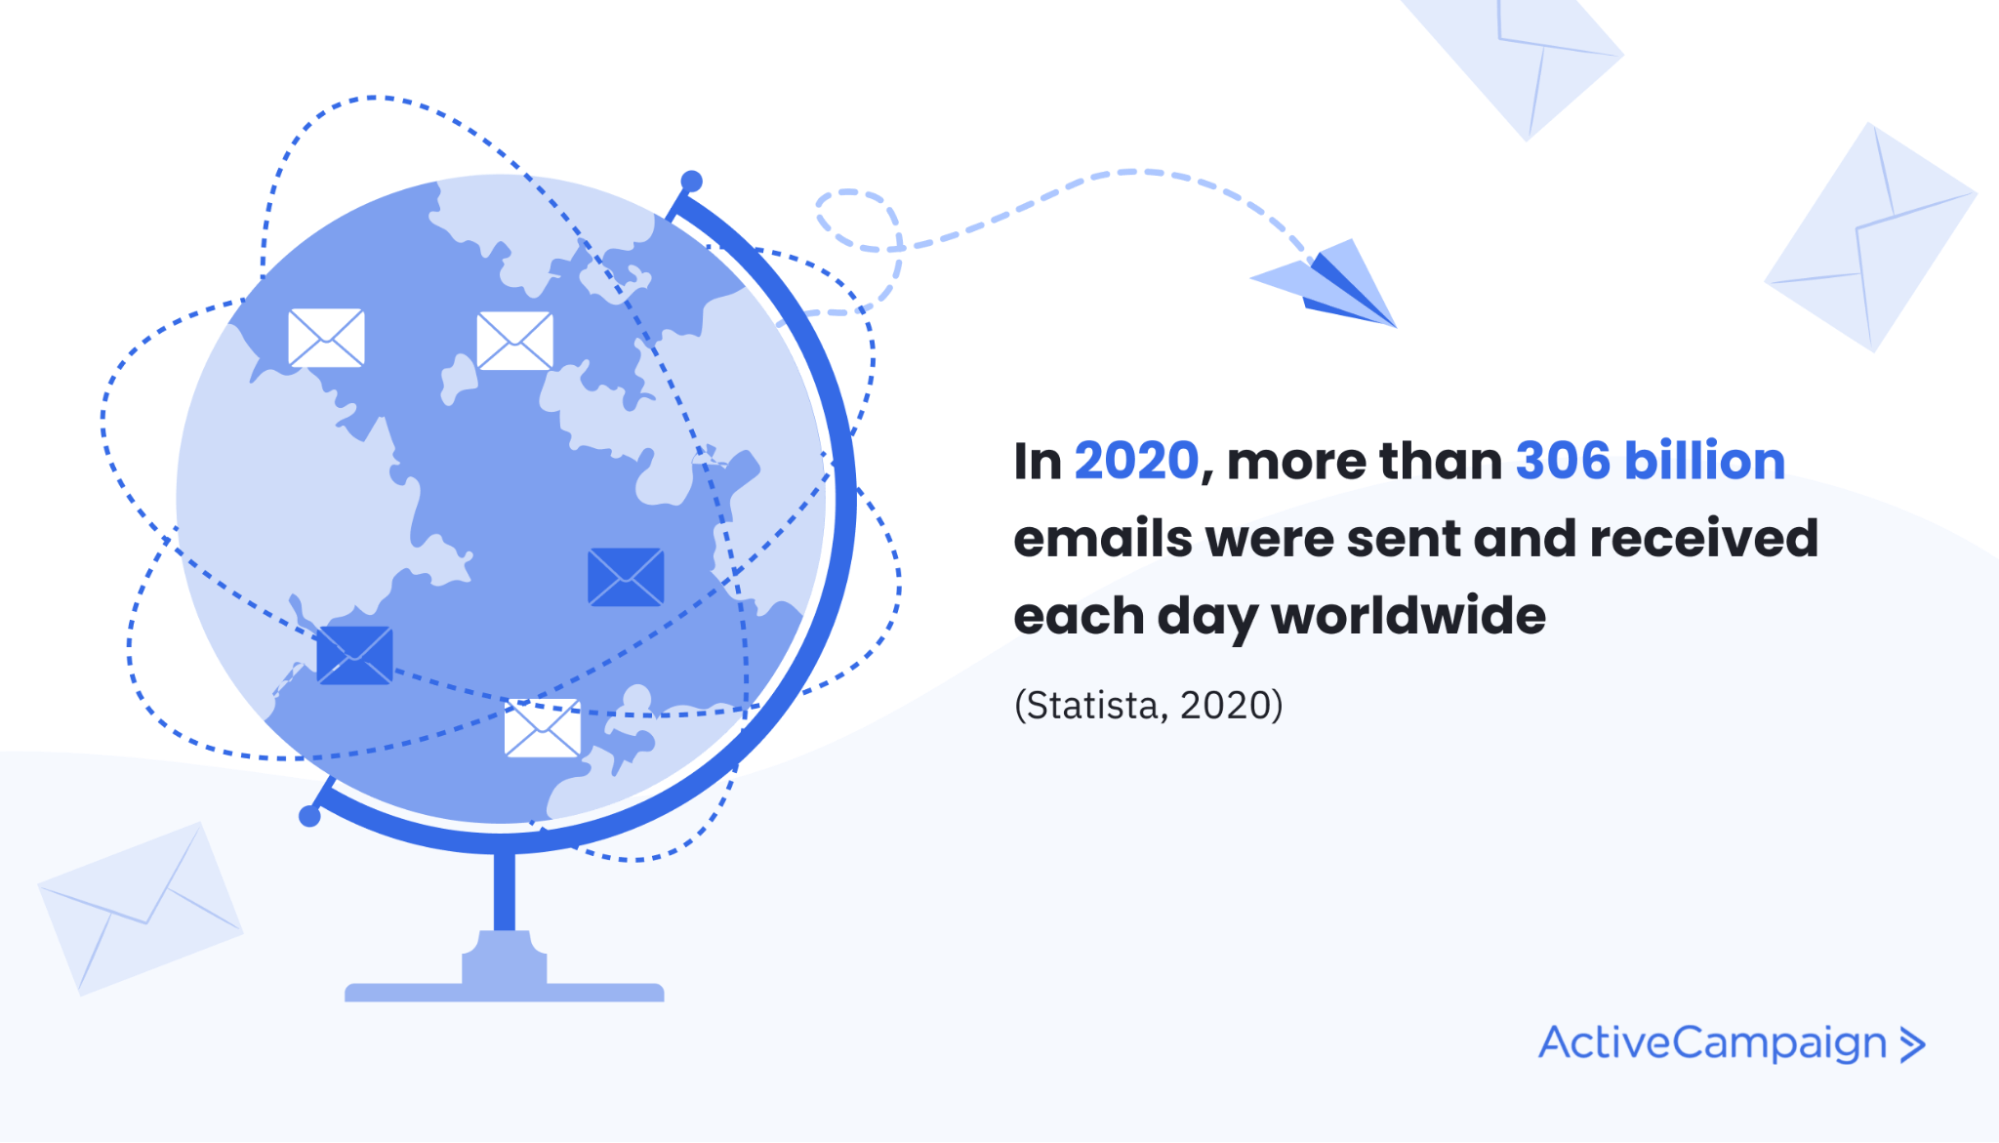 global email statistic "In 2020 more than 306 billion emails were sent and received each day worldwide"